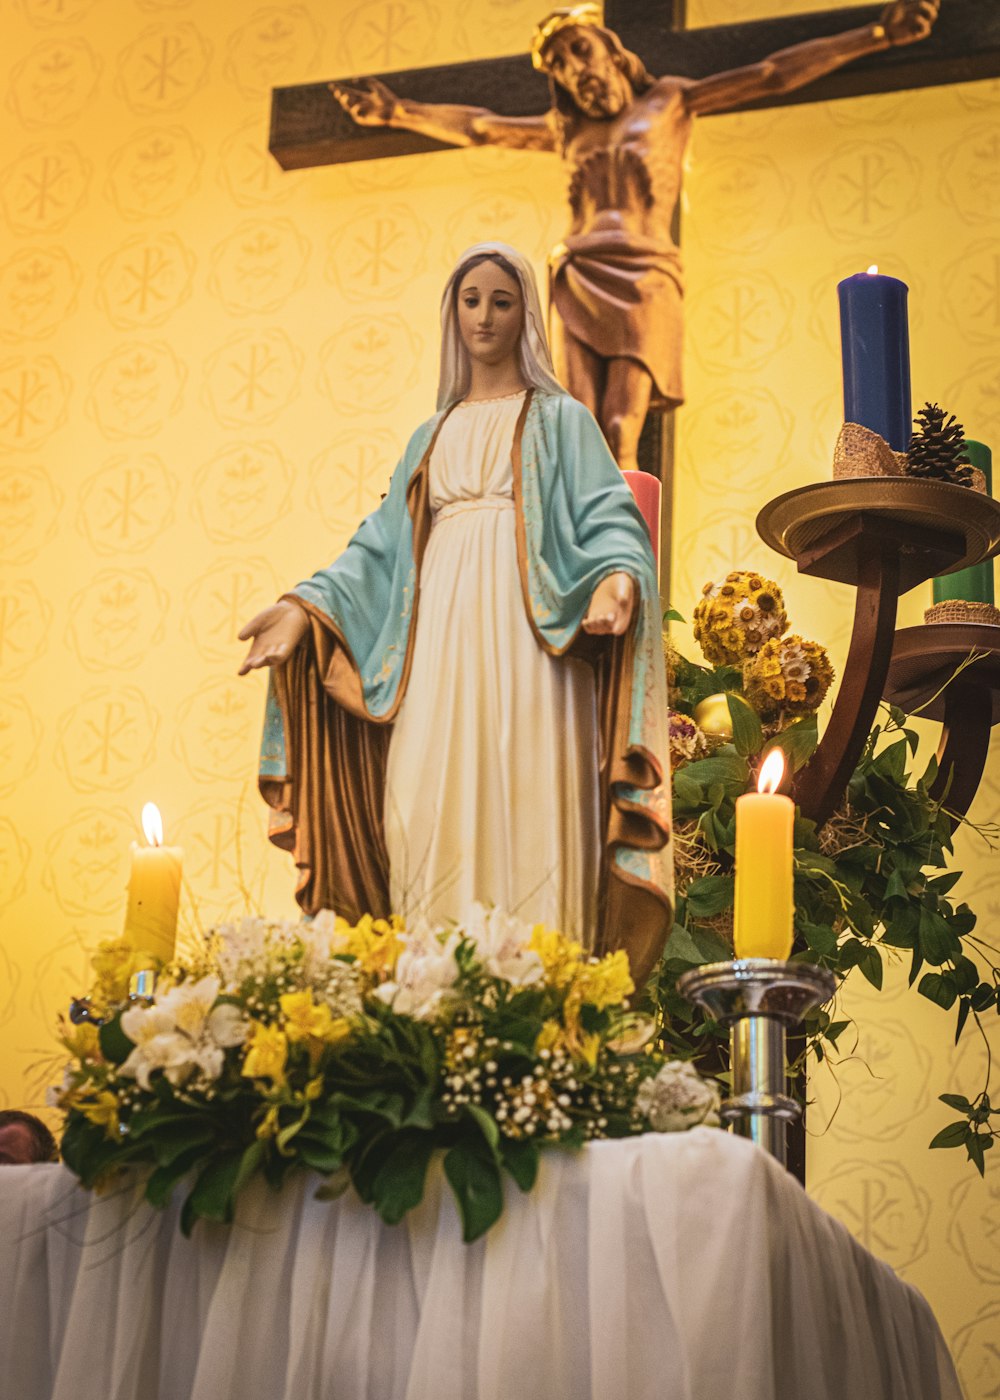 Suggested Options:

– Awe-Inspiring Collection of 999+ Full 4K Holy Mary Images
– Exquisite Holy Mary Images Collection: Over 999 in Stunning 4K
– Top-Rated 4K Holy Mary Images: Browse Our Impressive Compilation of 999+ 
– Discover the Beauty of Holy Mary: 999+ Images in Mesmerizing 4K Quality
– Massive Holy Mary Images Collection: 999+ Breathtaking 4K Pictures
– Unparalleled Array of Holy Mary Images: 999+ in Crystal-Clear 4K